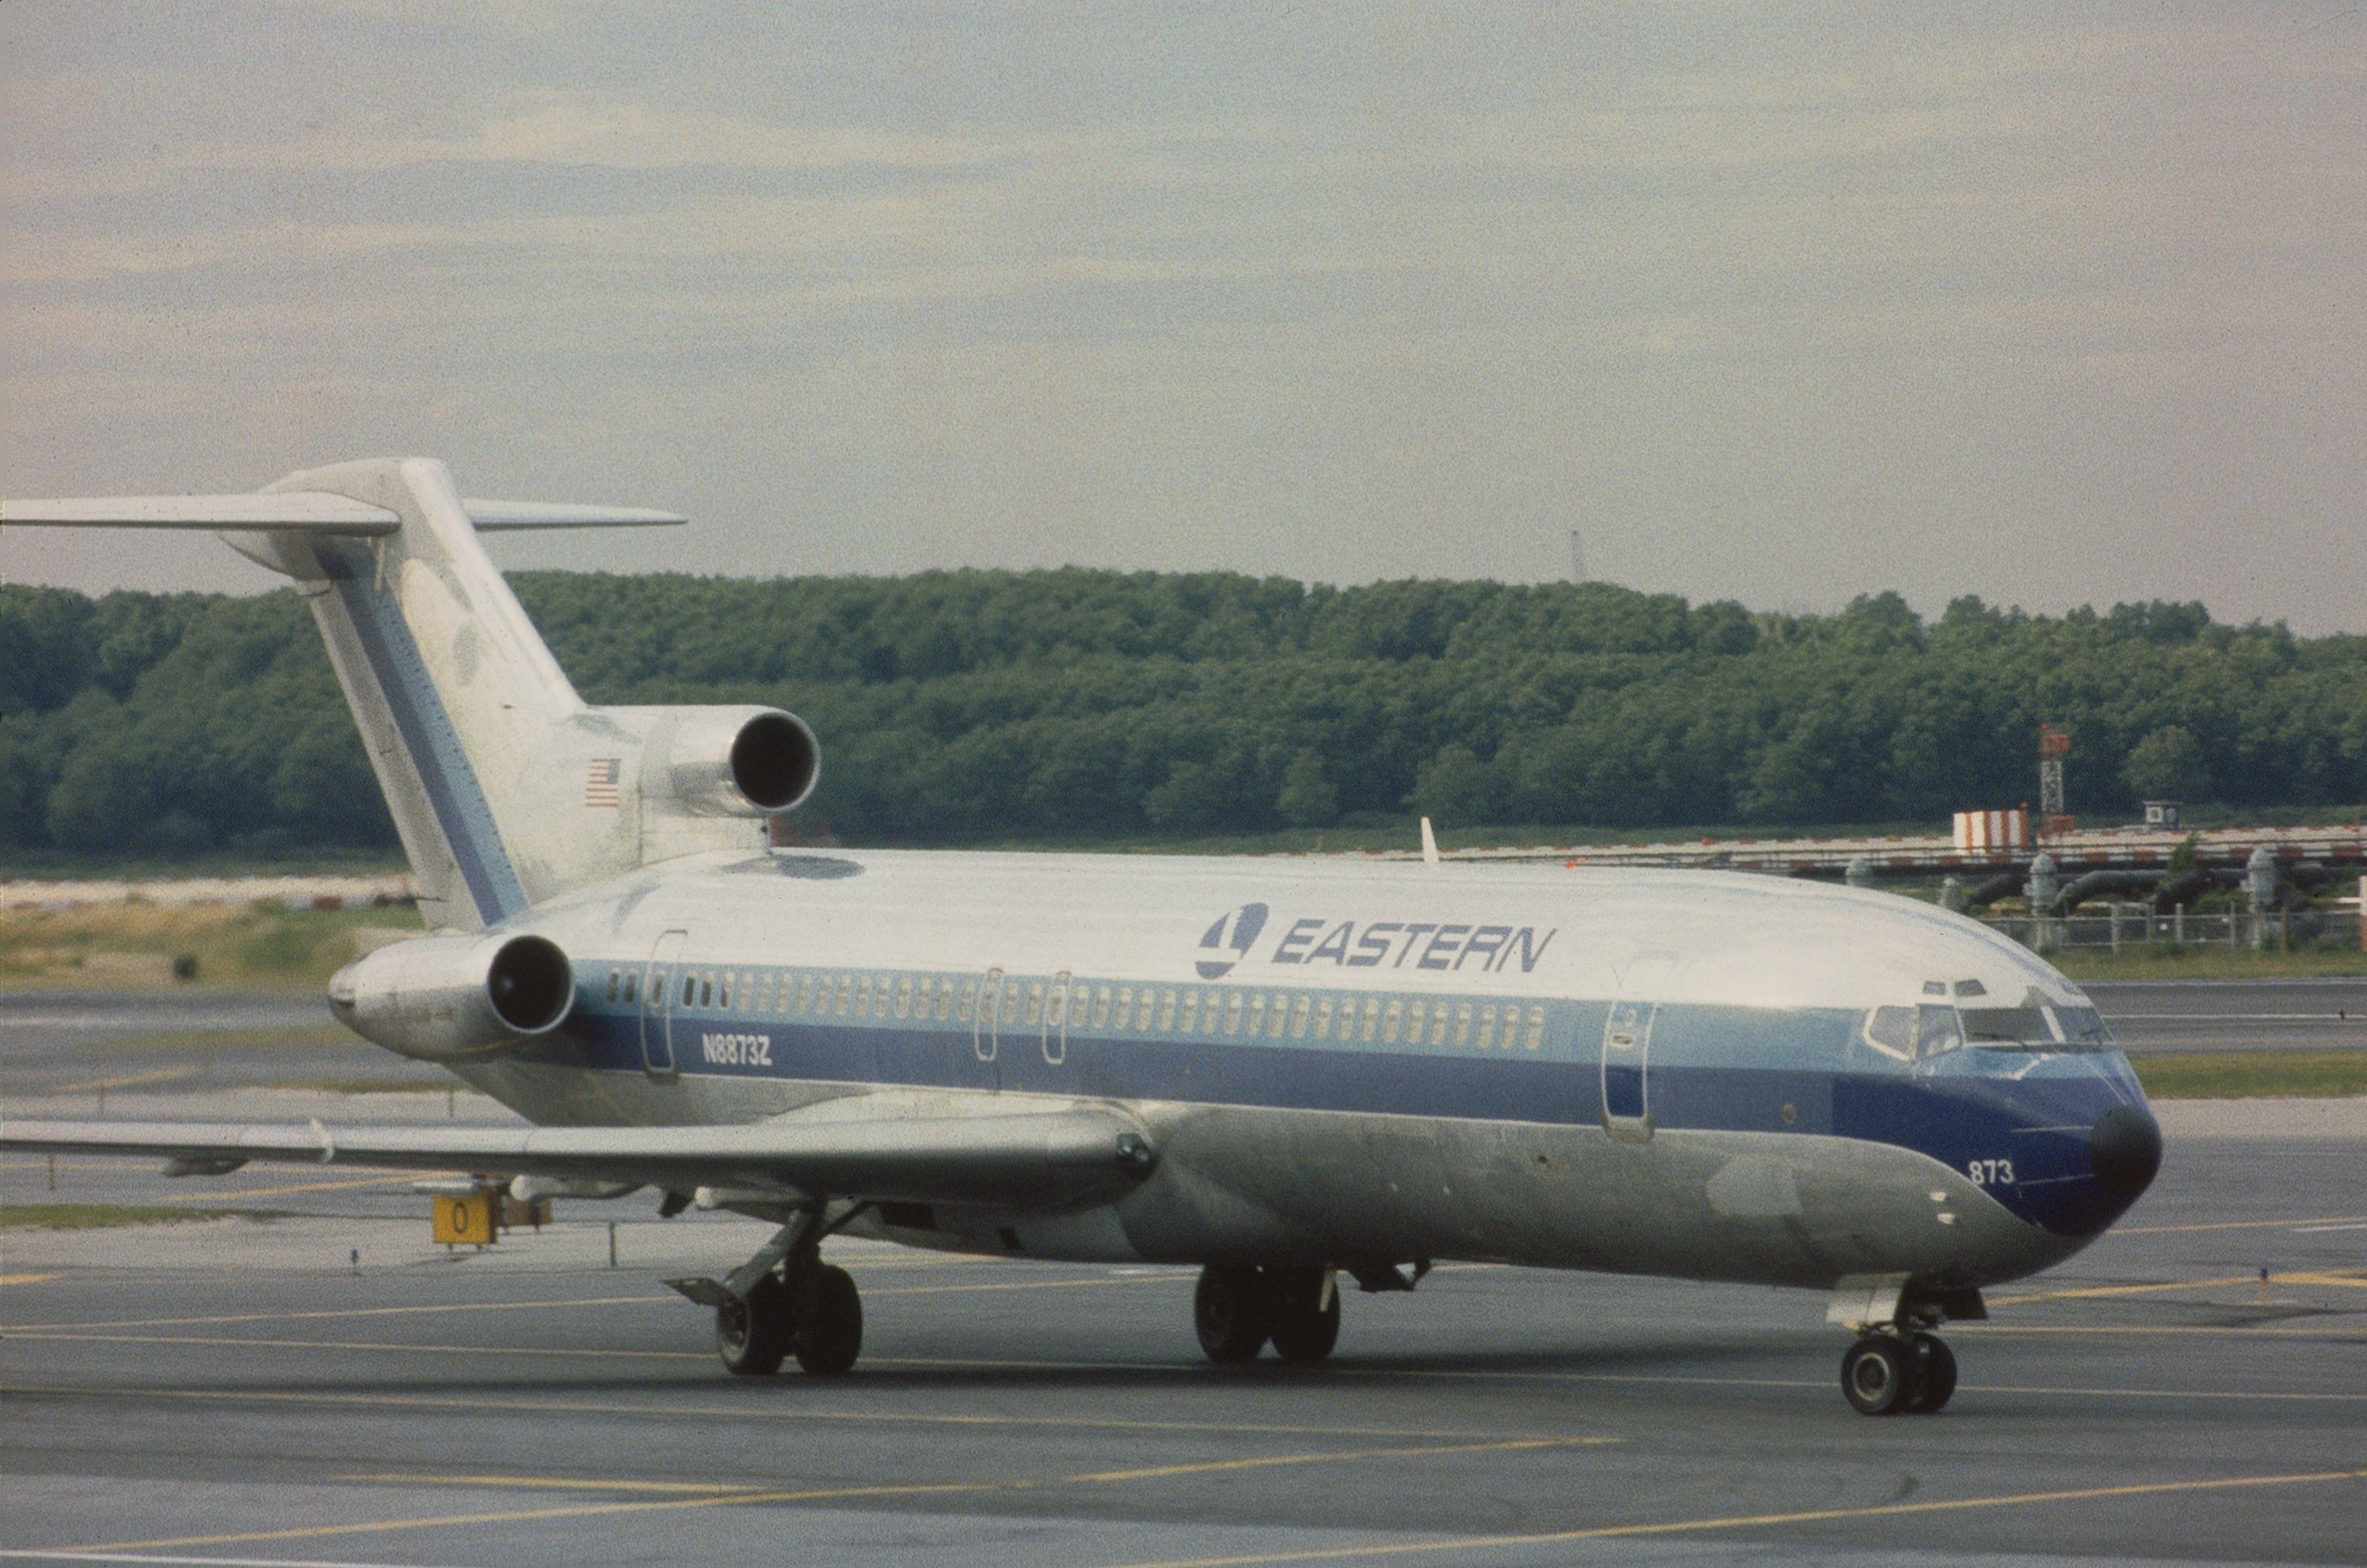 A Boeing 727 on an airport apron.